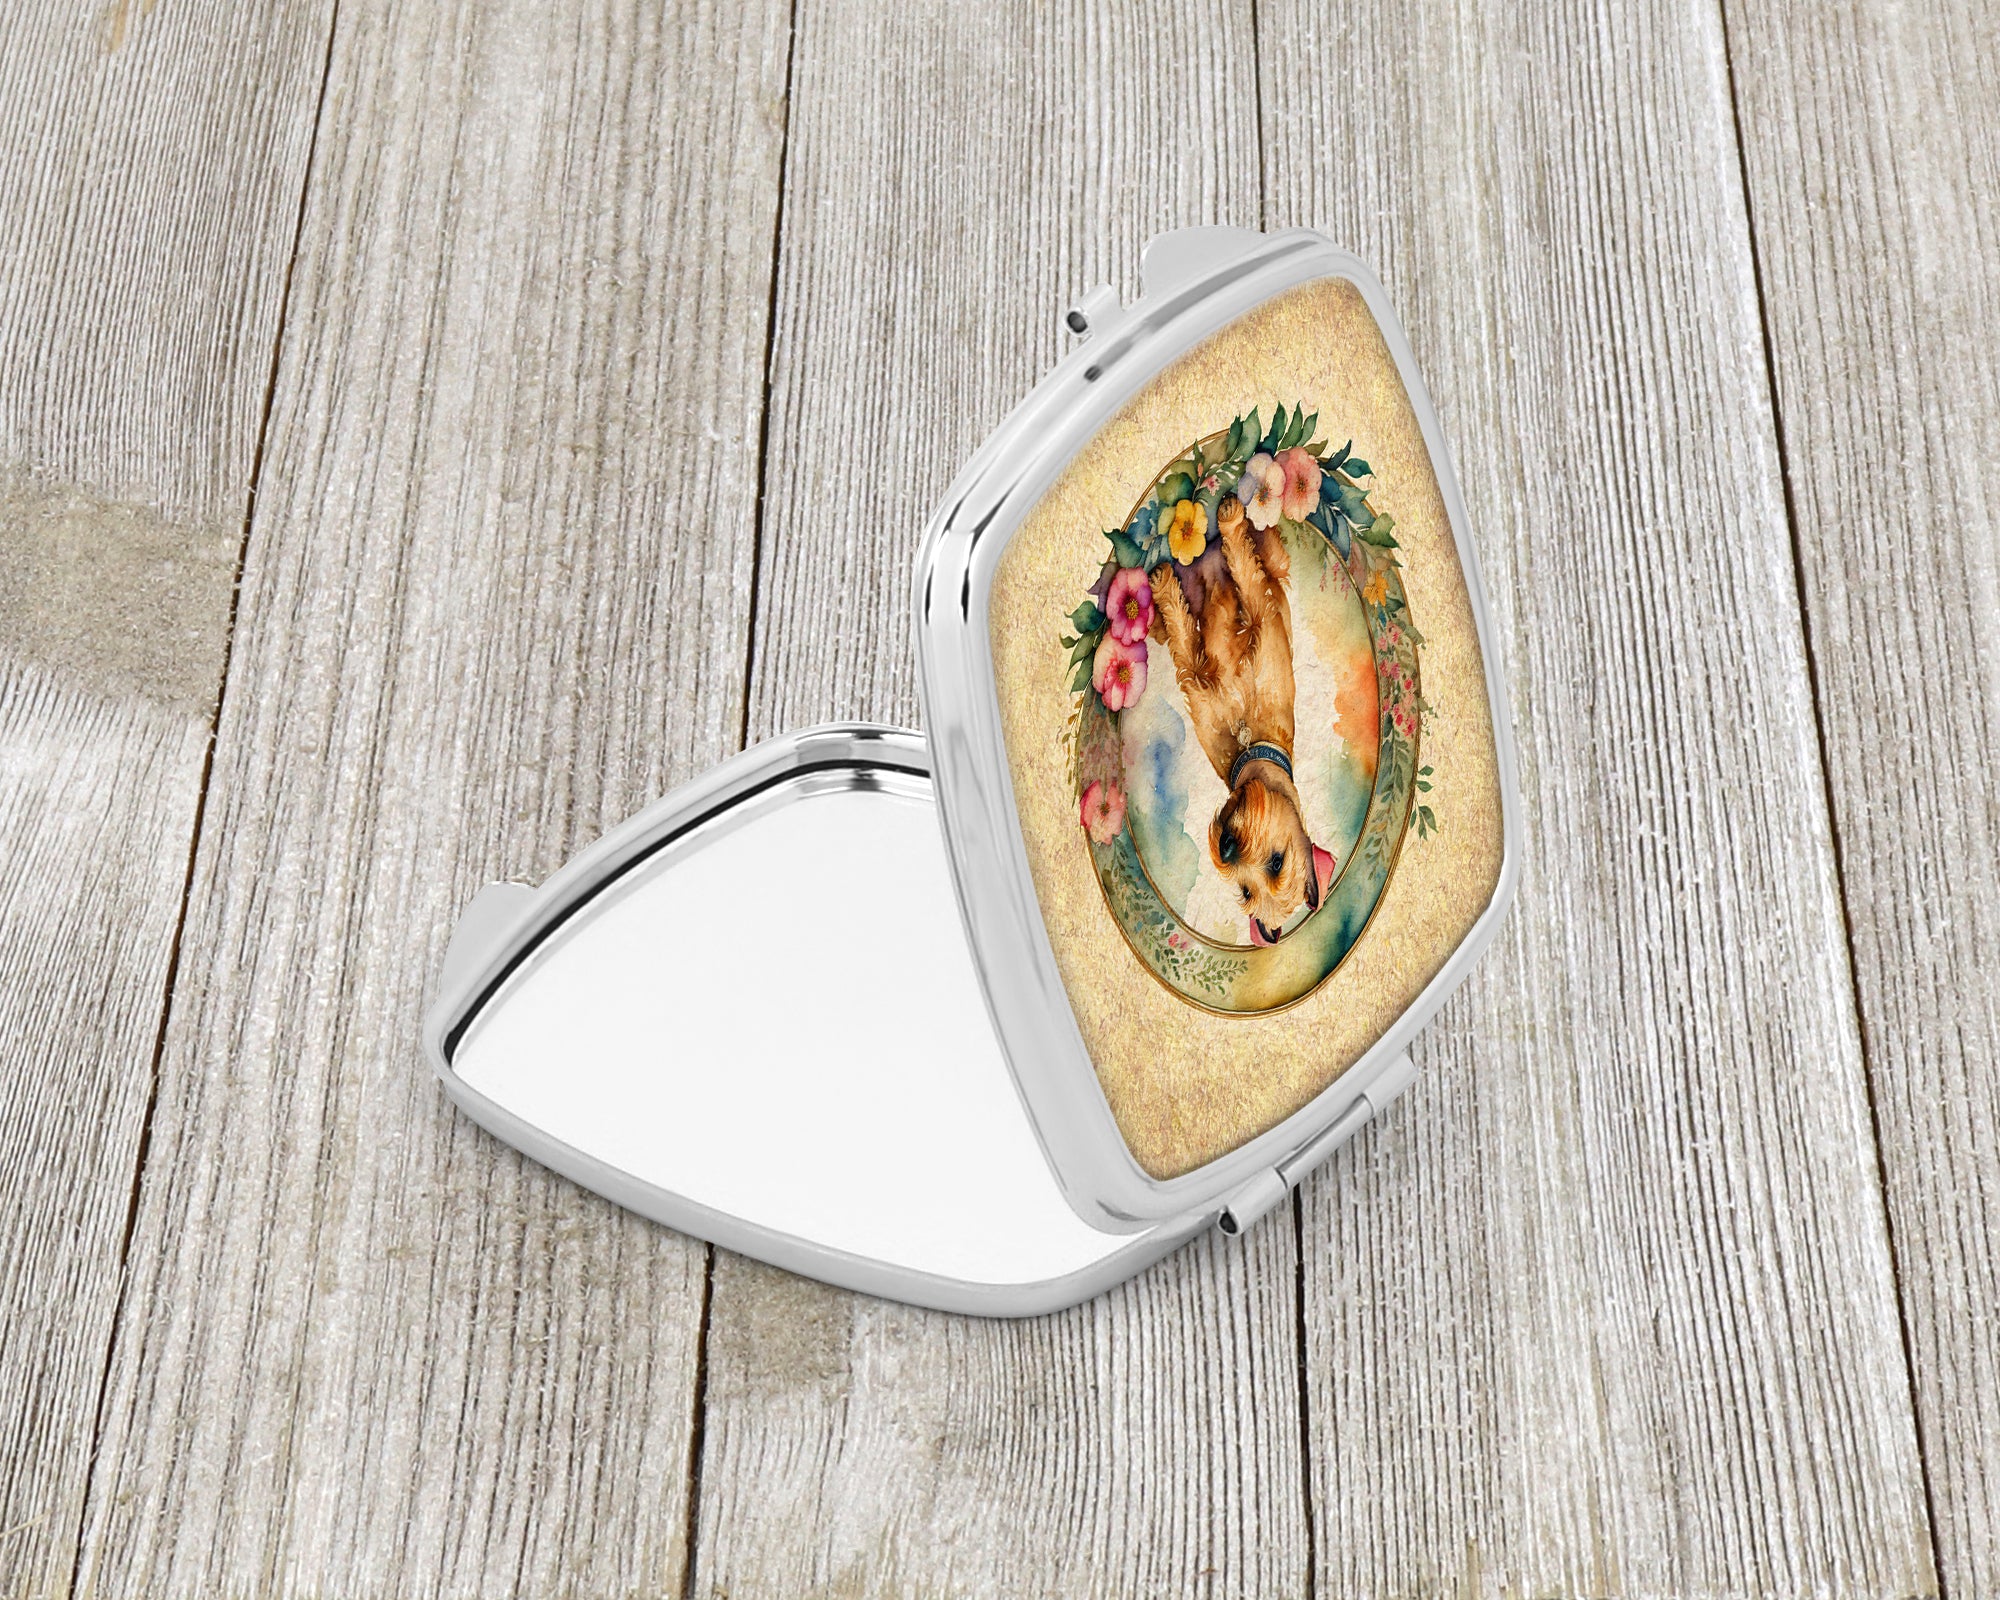 Lakeland Terrier and Flowers Compact Mirror